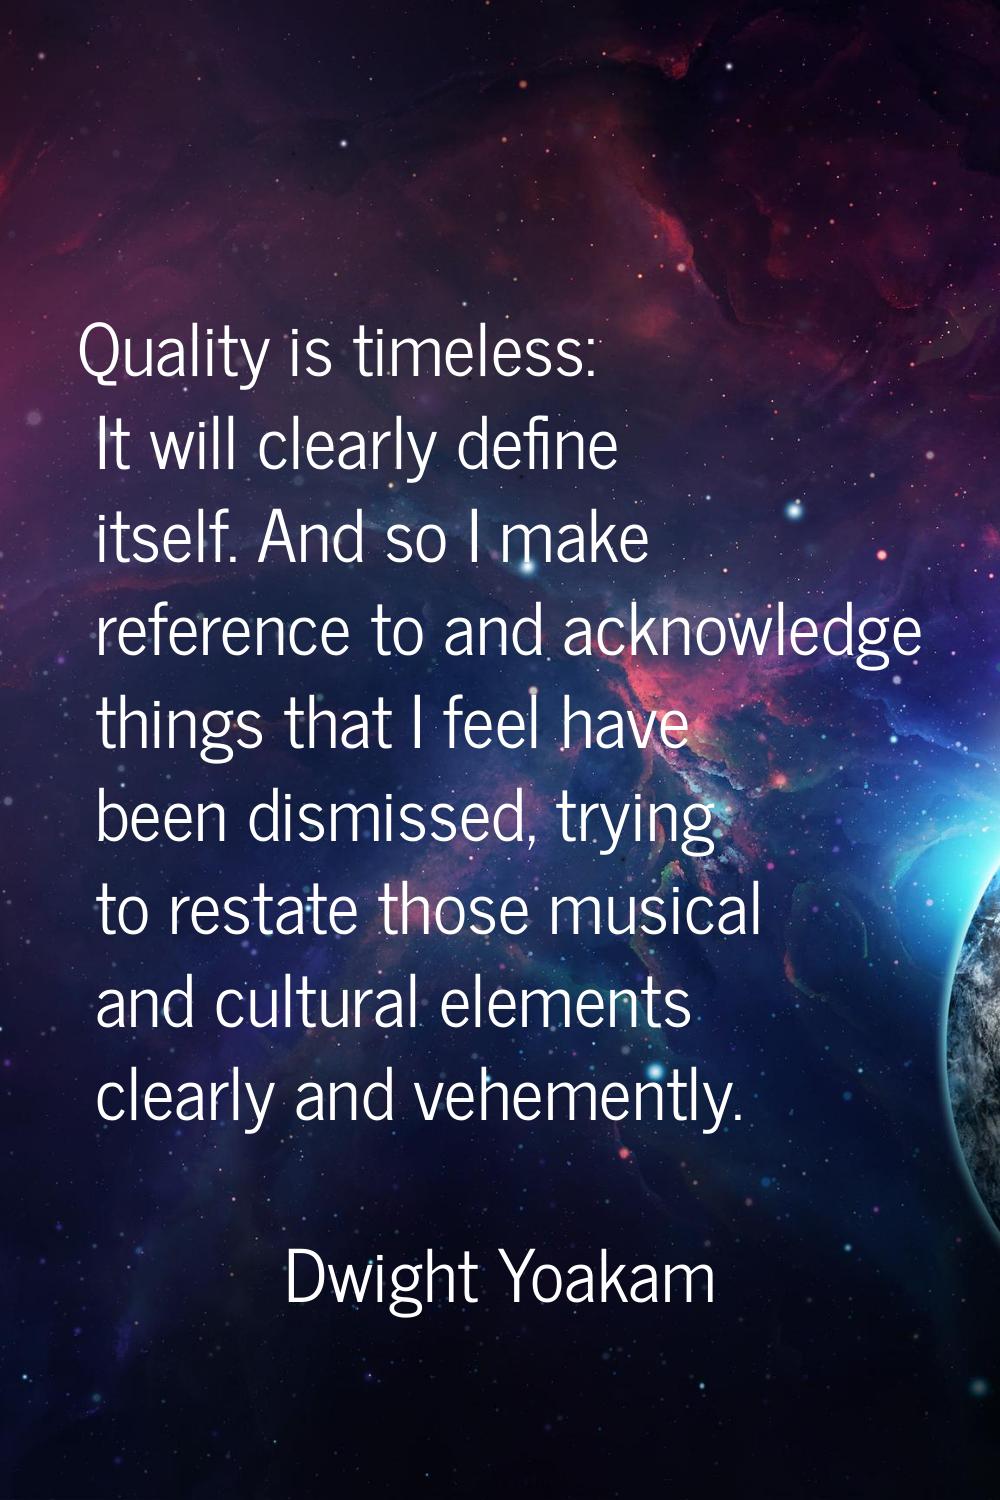 Quality is timeless: It will clearly define itself. And so I make reference to and acknowledge thin